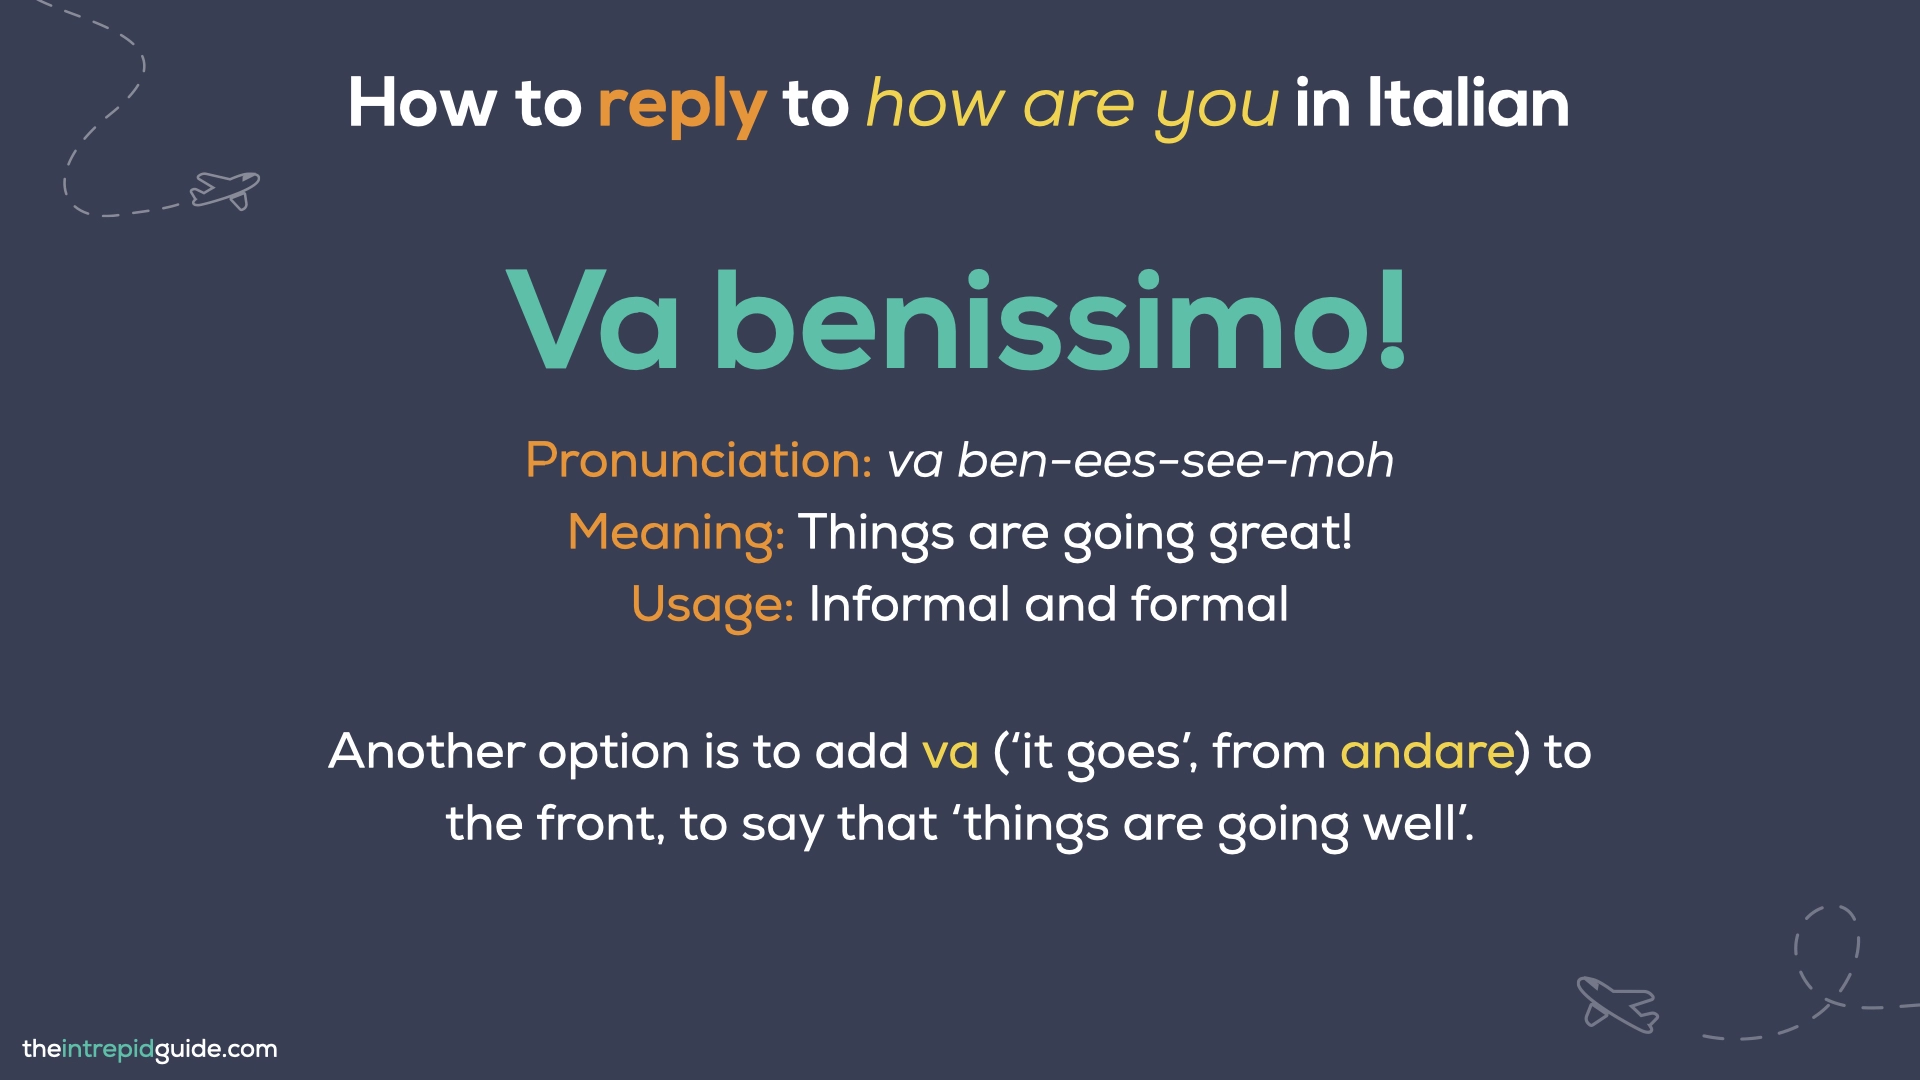 How to say How are you in Italian - Va benissimo